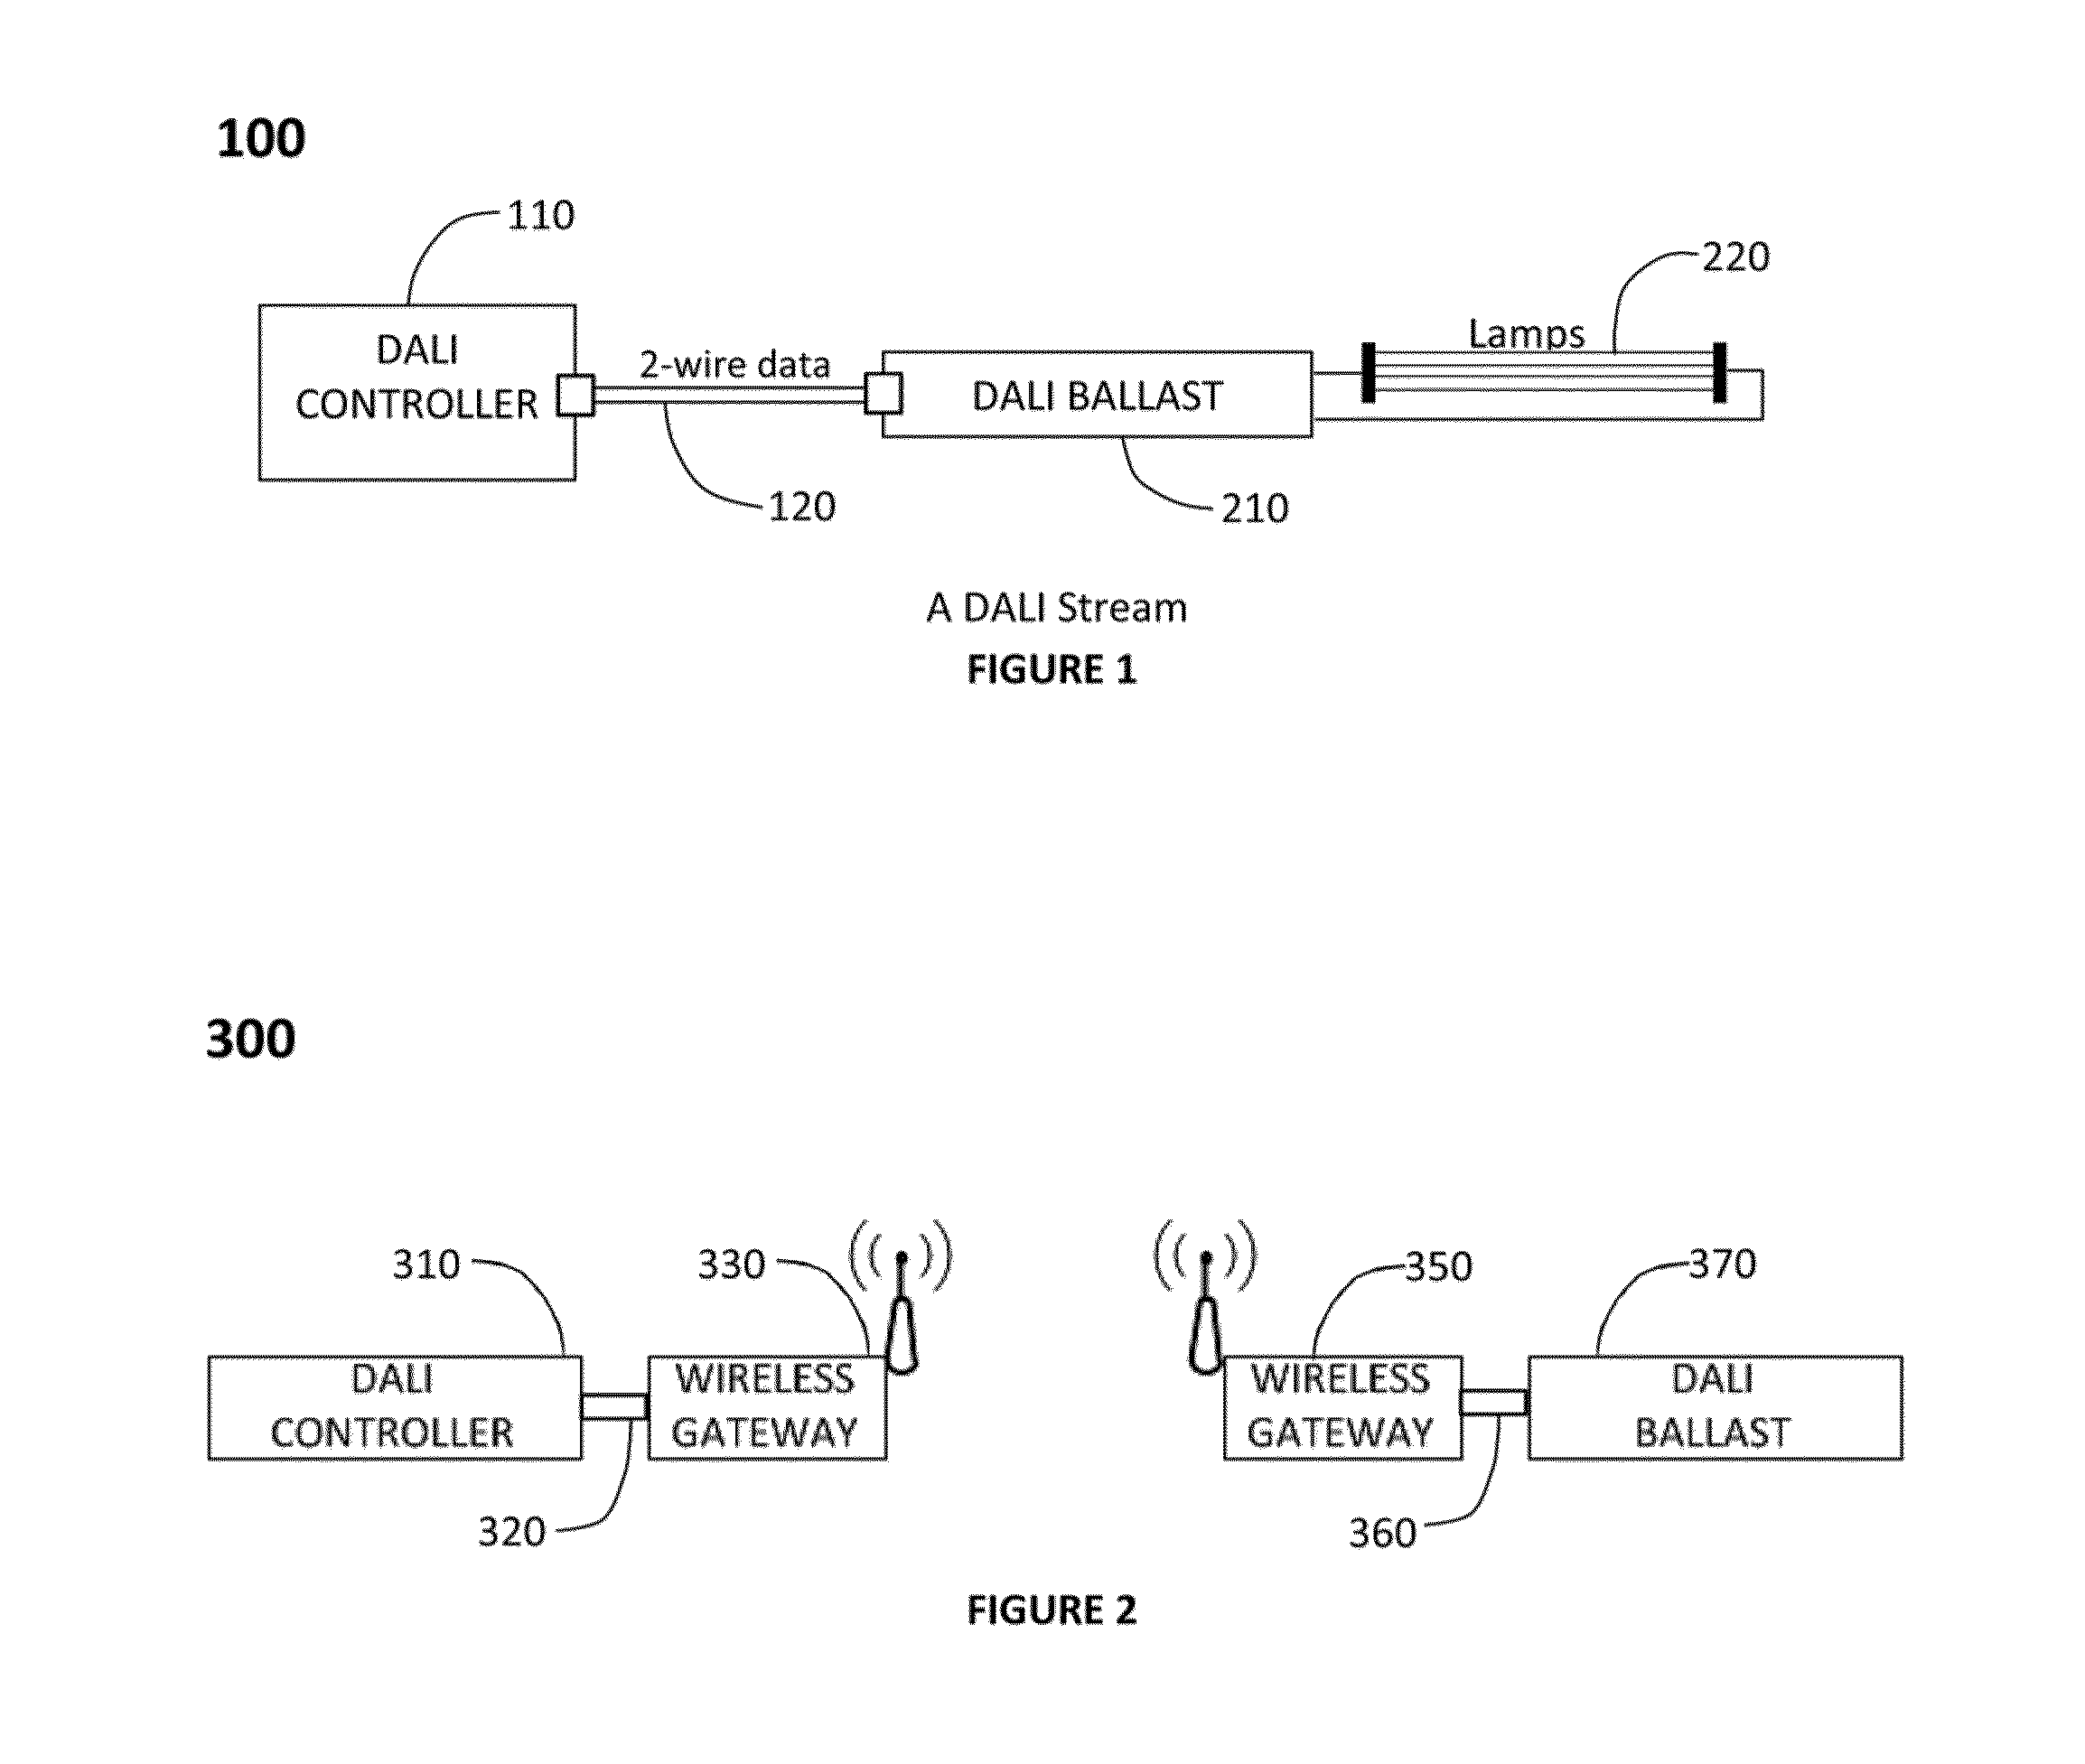 Method of supporting DALI protocol between DALI controllers and devices over an intermediate communication protocol